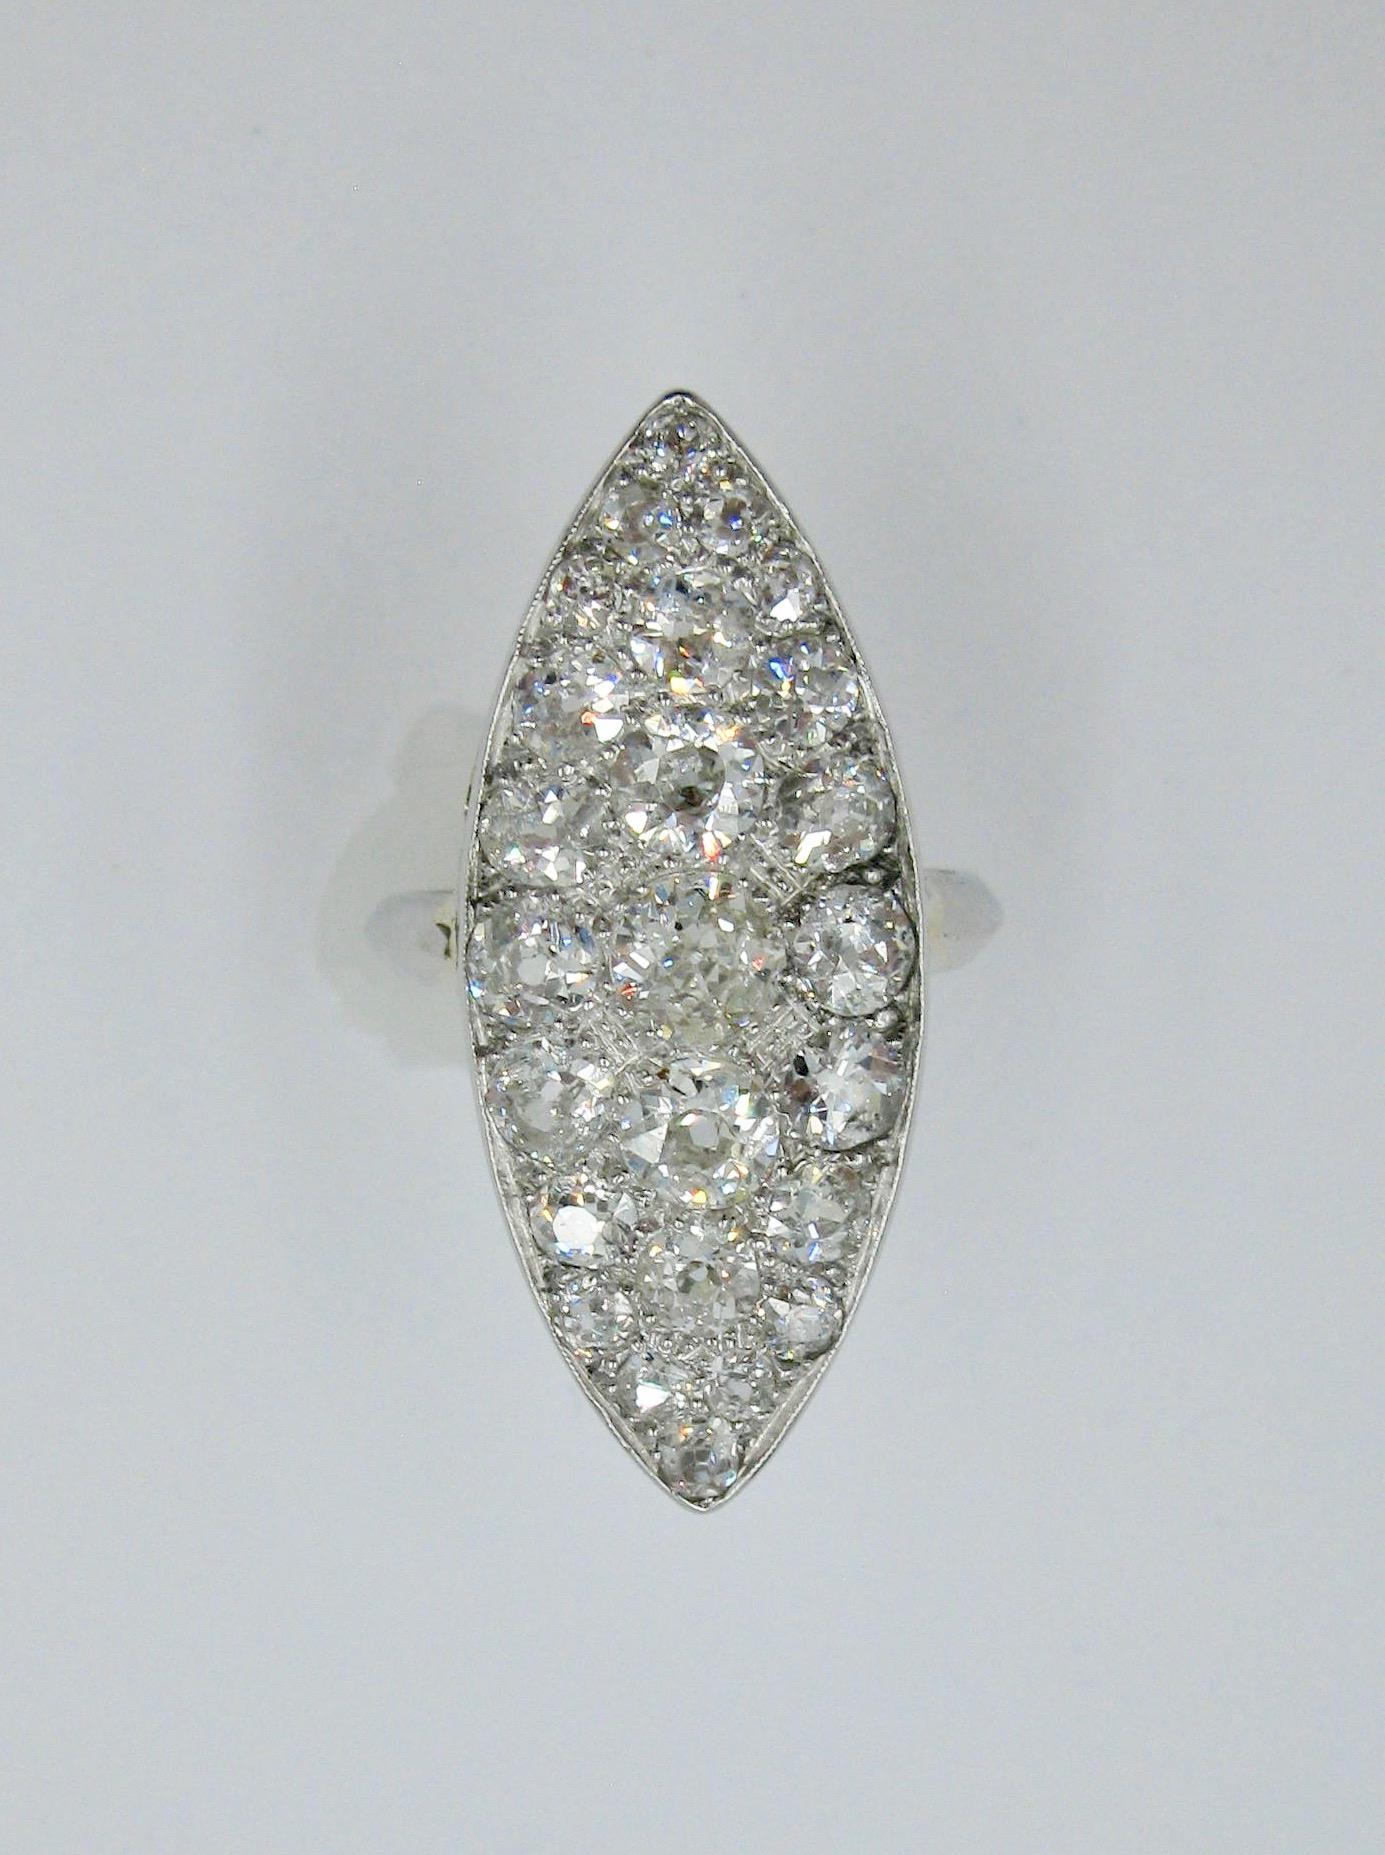 A dramatic Antique Edwardian Diamond Ring in Platinum with 3.5 Carats of spectacular G color (white white white) and VS clarity (clean) Old European Cut Diamonds.  This monumental antique Edwardian to Victorian diamond ring has a central diamond of